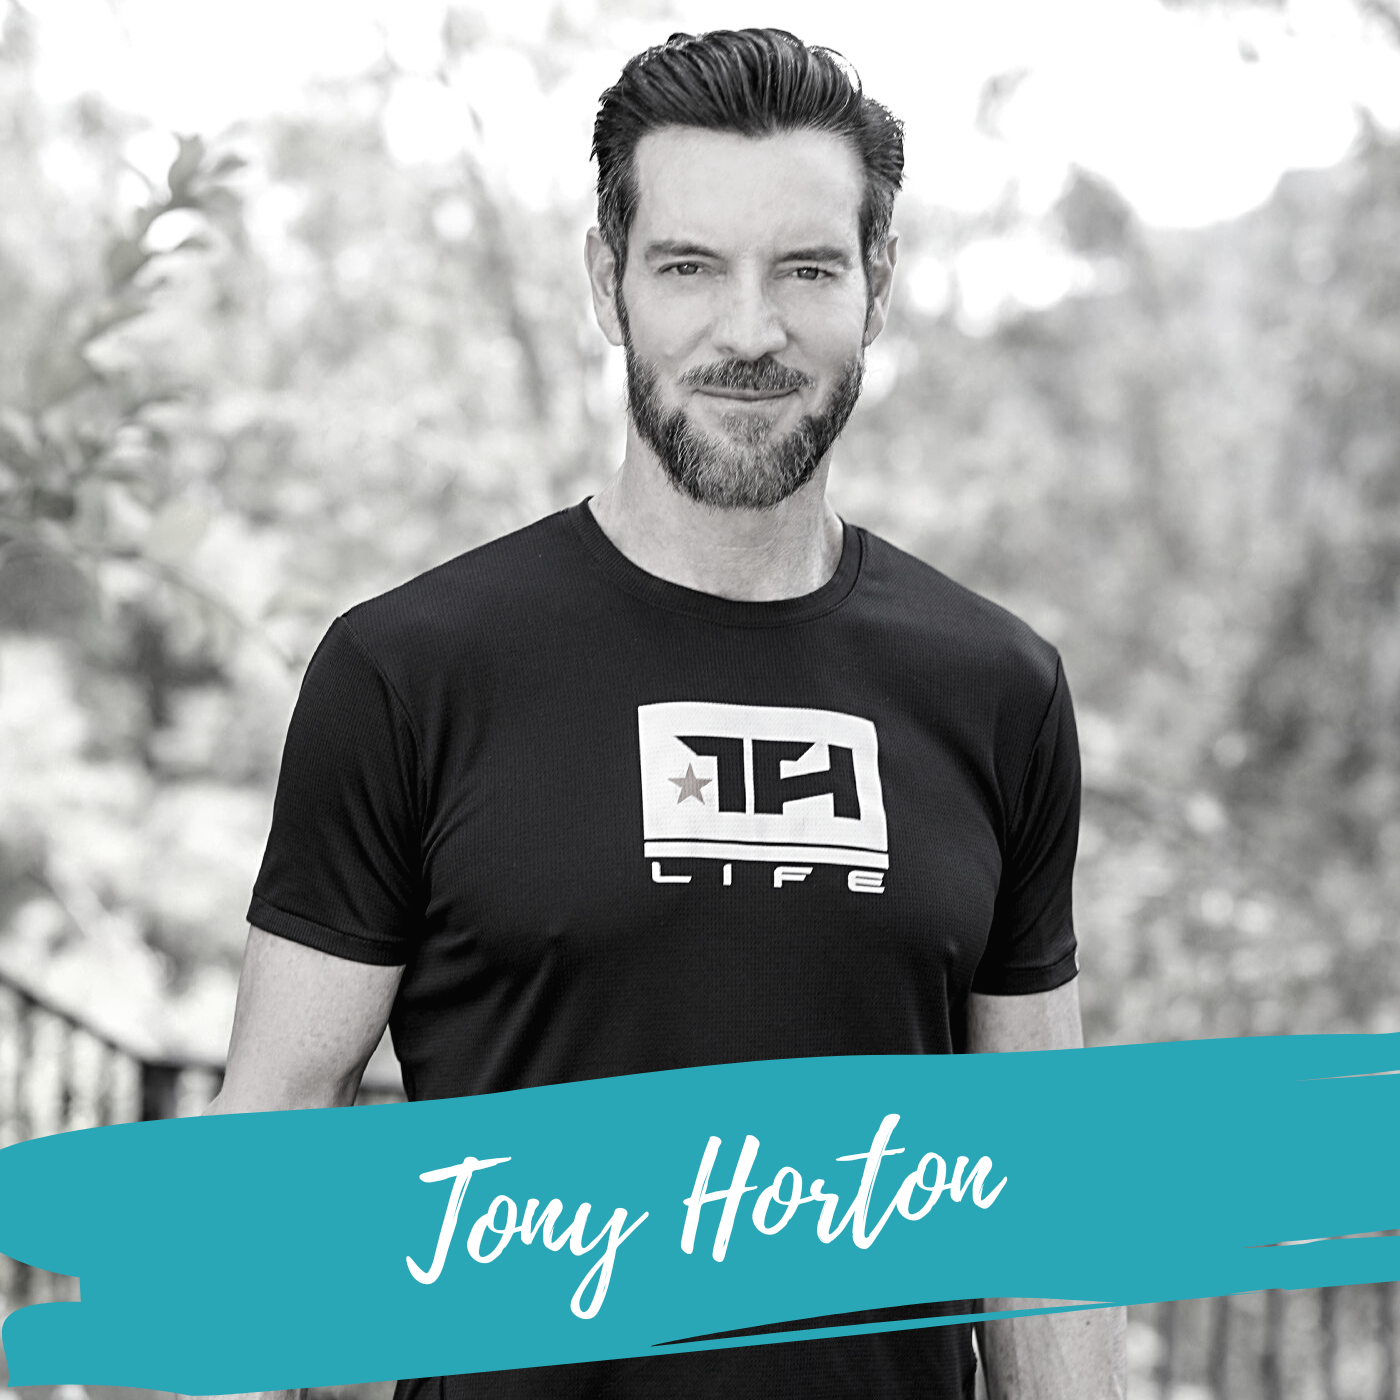 Best Ways to Exercise: A Variety Is Key for Health and Well-Being – With Tony Horton